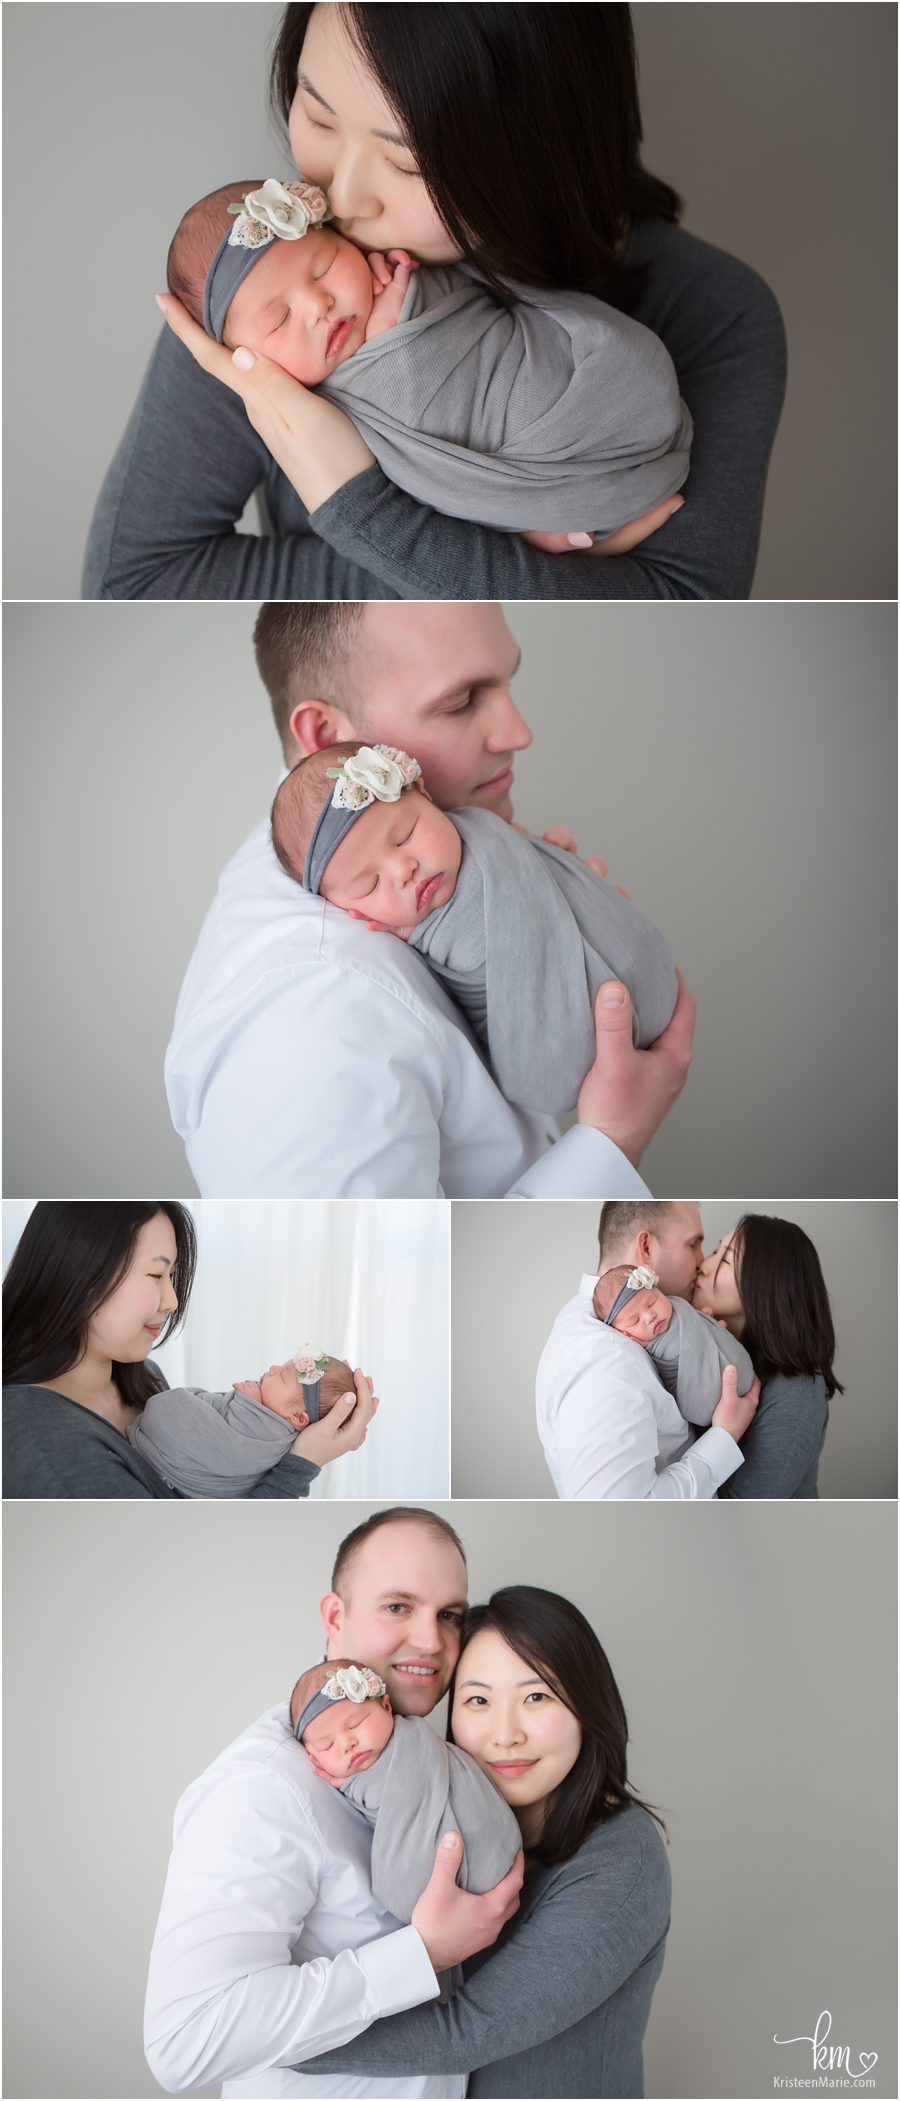 family shots with newborn baby girl - grey and white tones